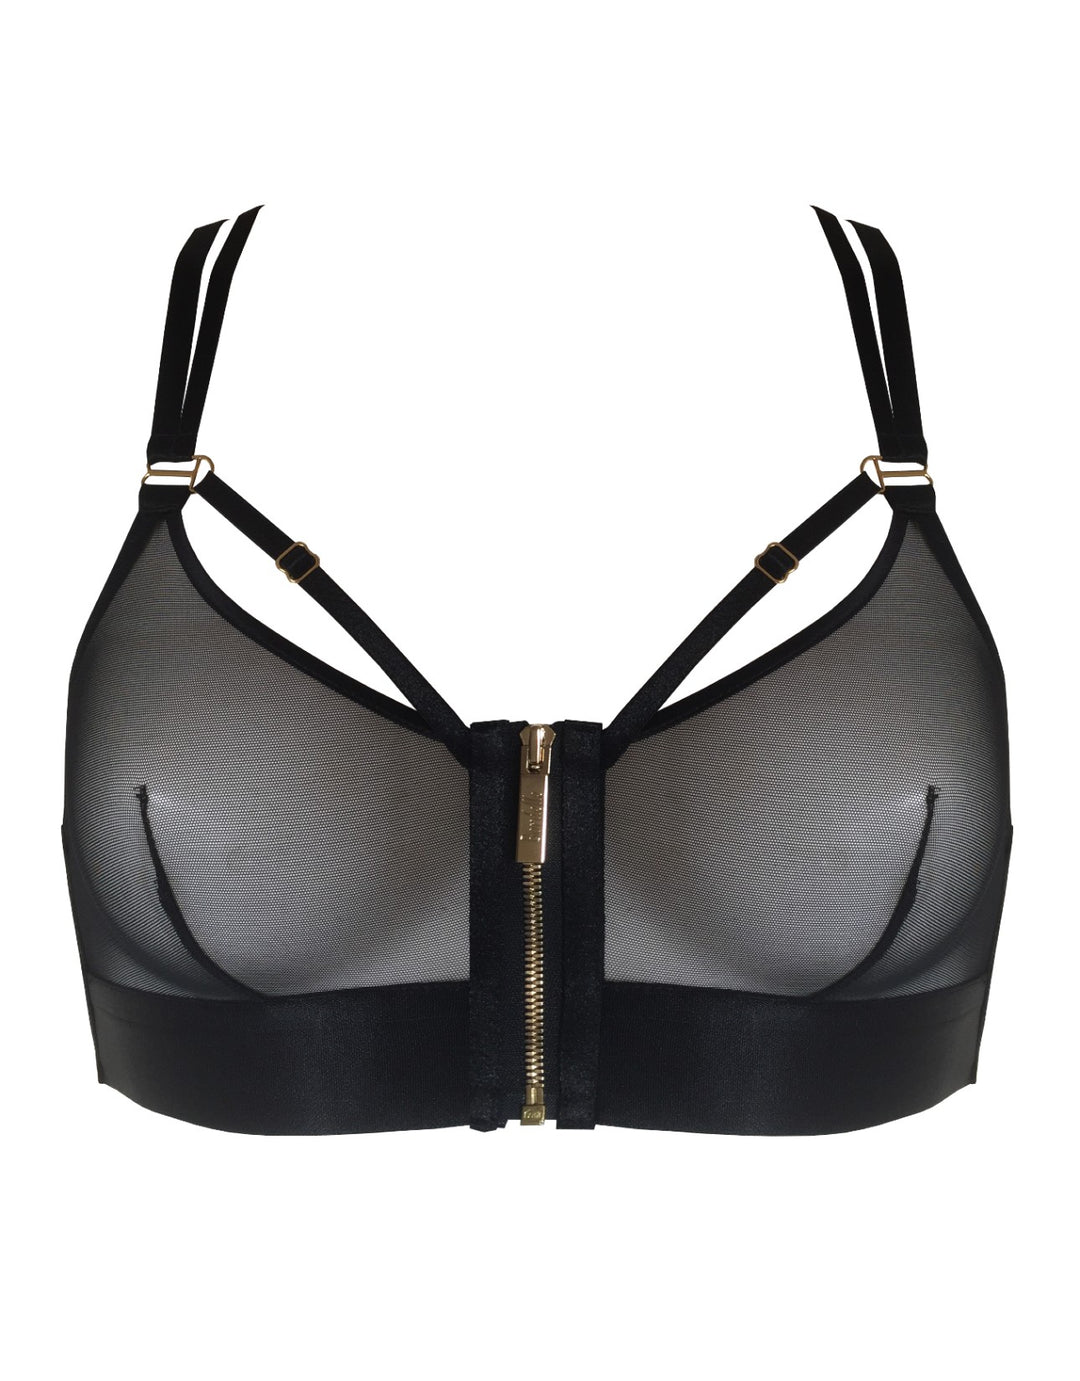 Bordelle Lingerie Ula Soft Cup Bra with Zip Front in Black